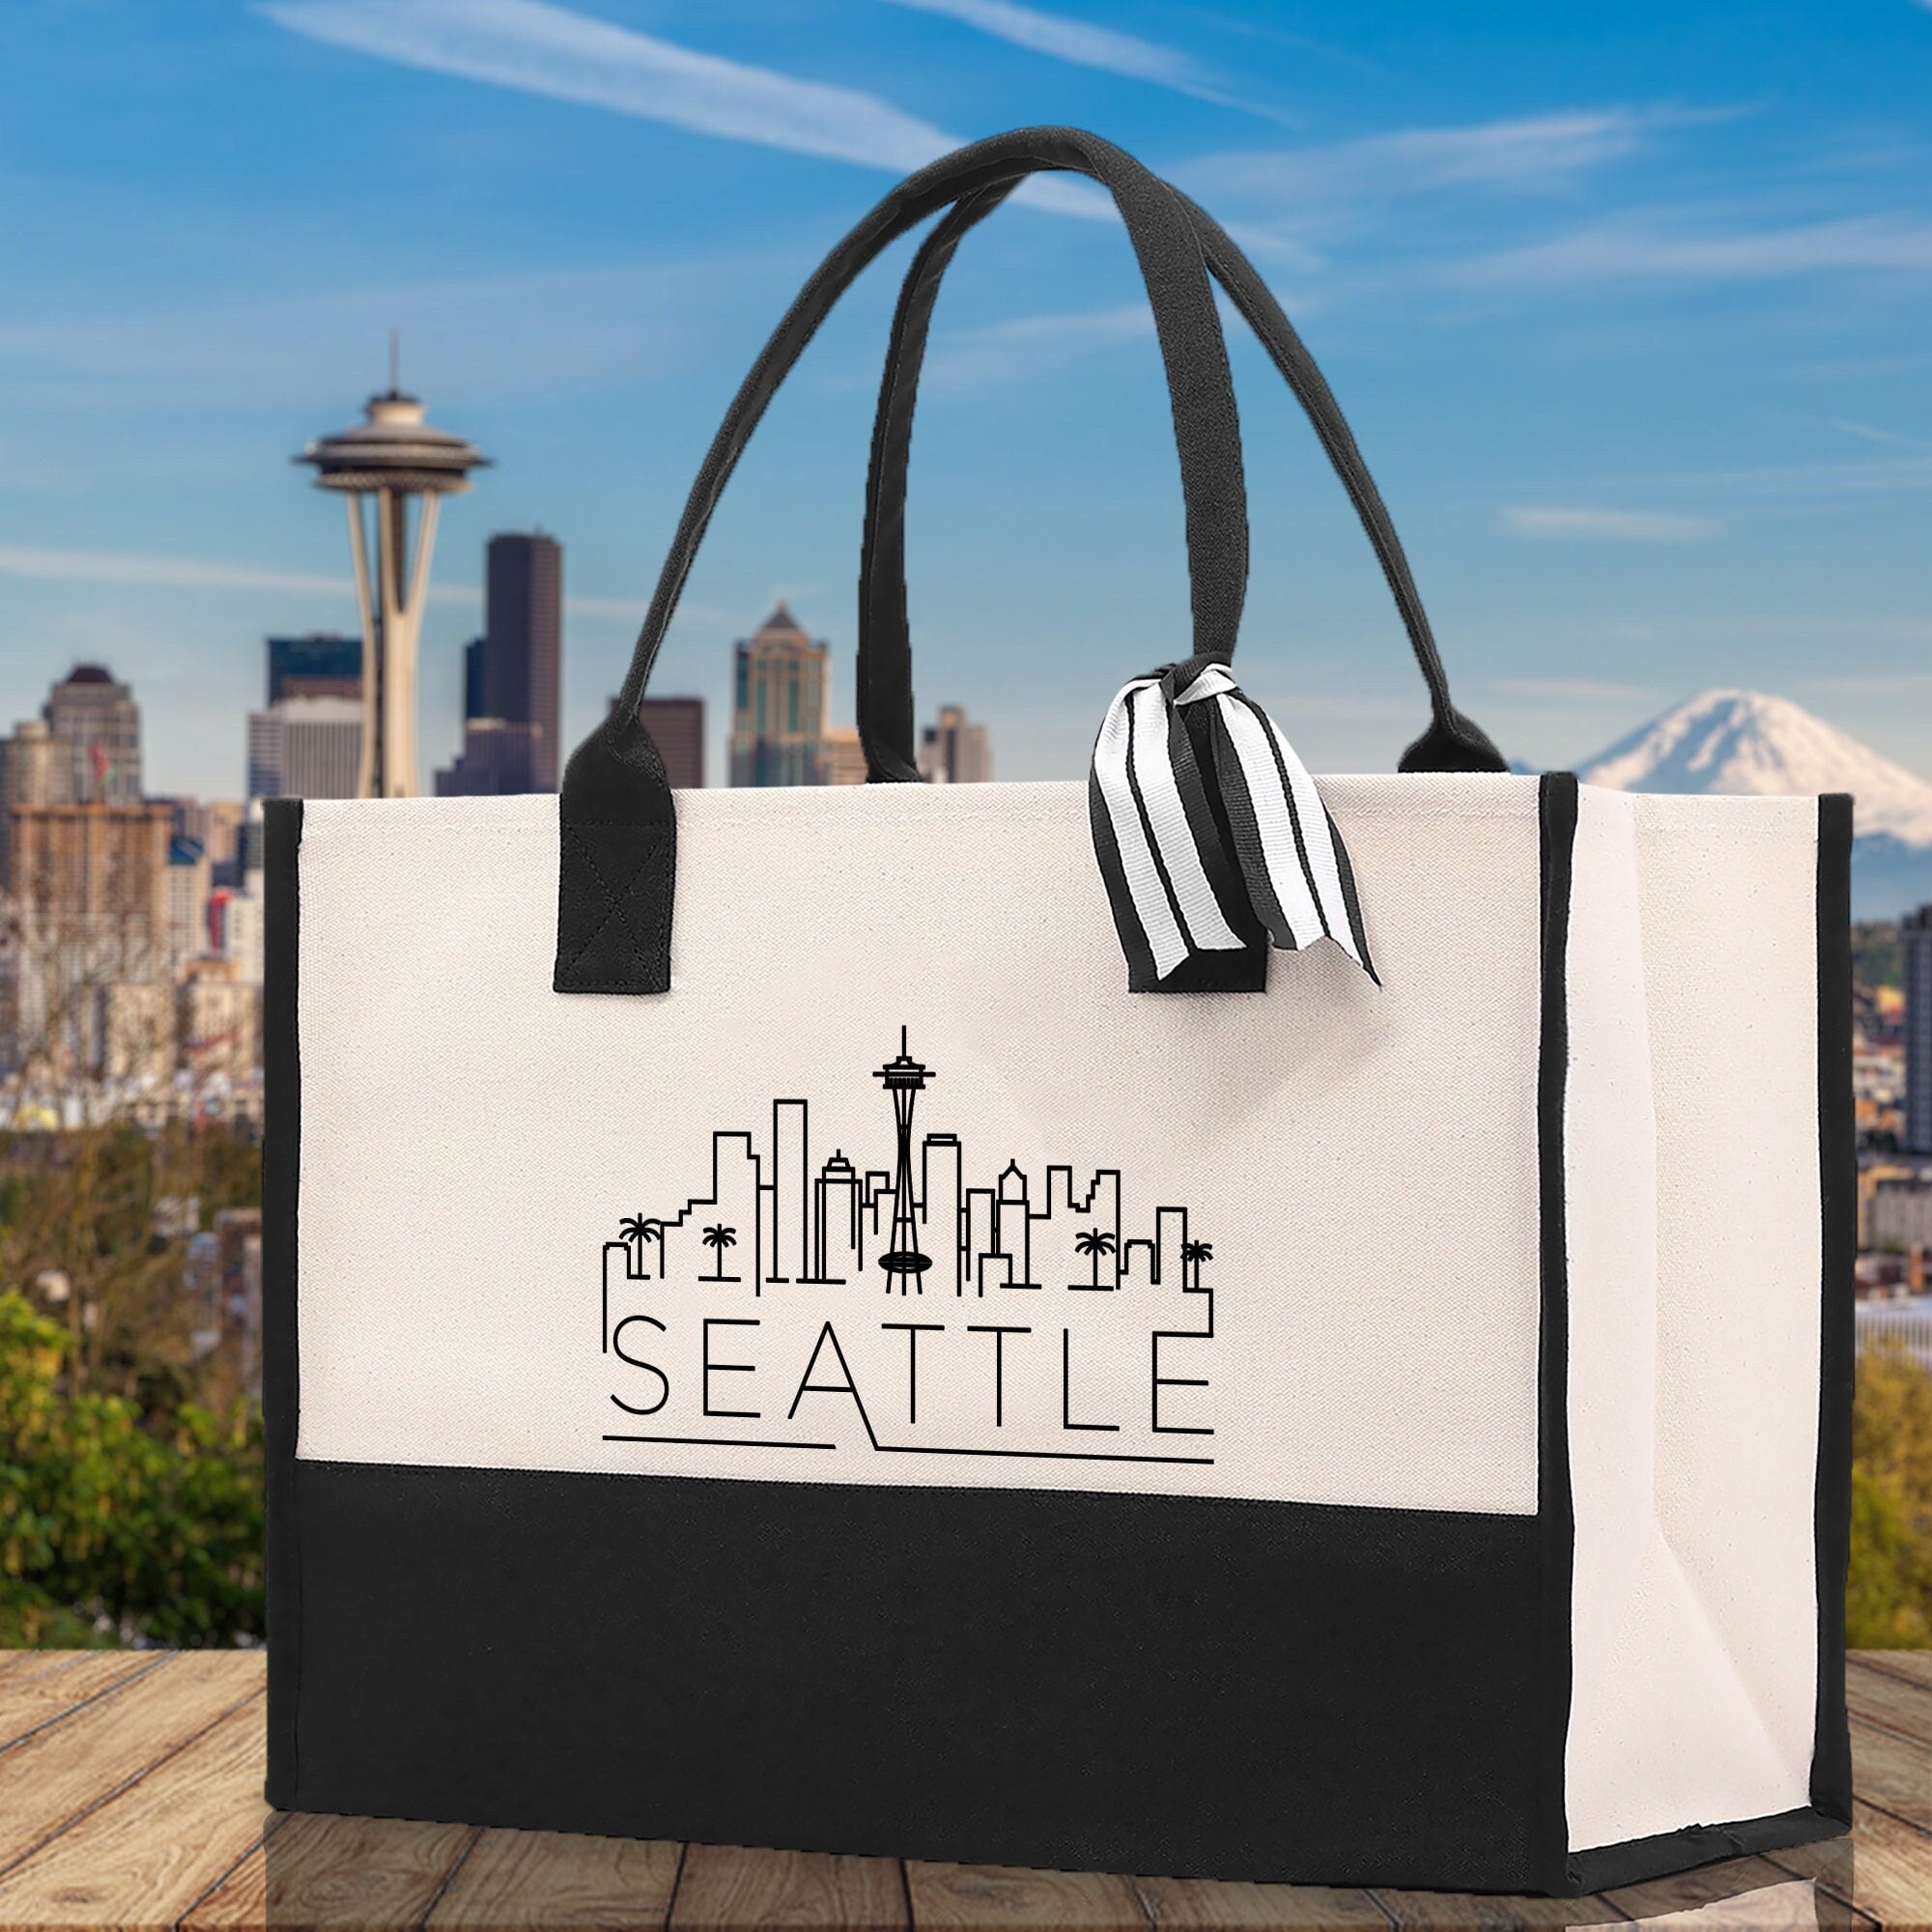 Seattle Canvas Tote Bag Travel Vacation Tote Employee and Client Gift Wedding Favor Birthday Welcome Tote Bag Bridesmaid Gift